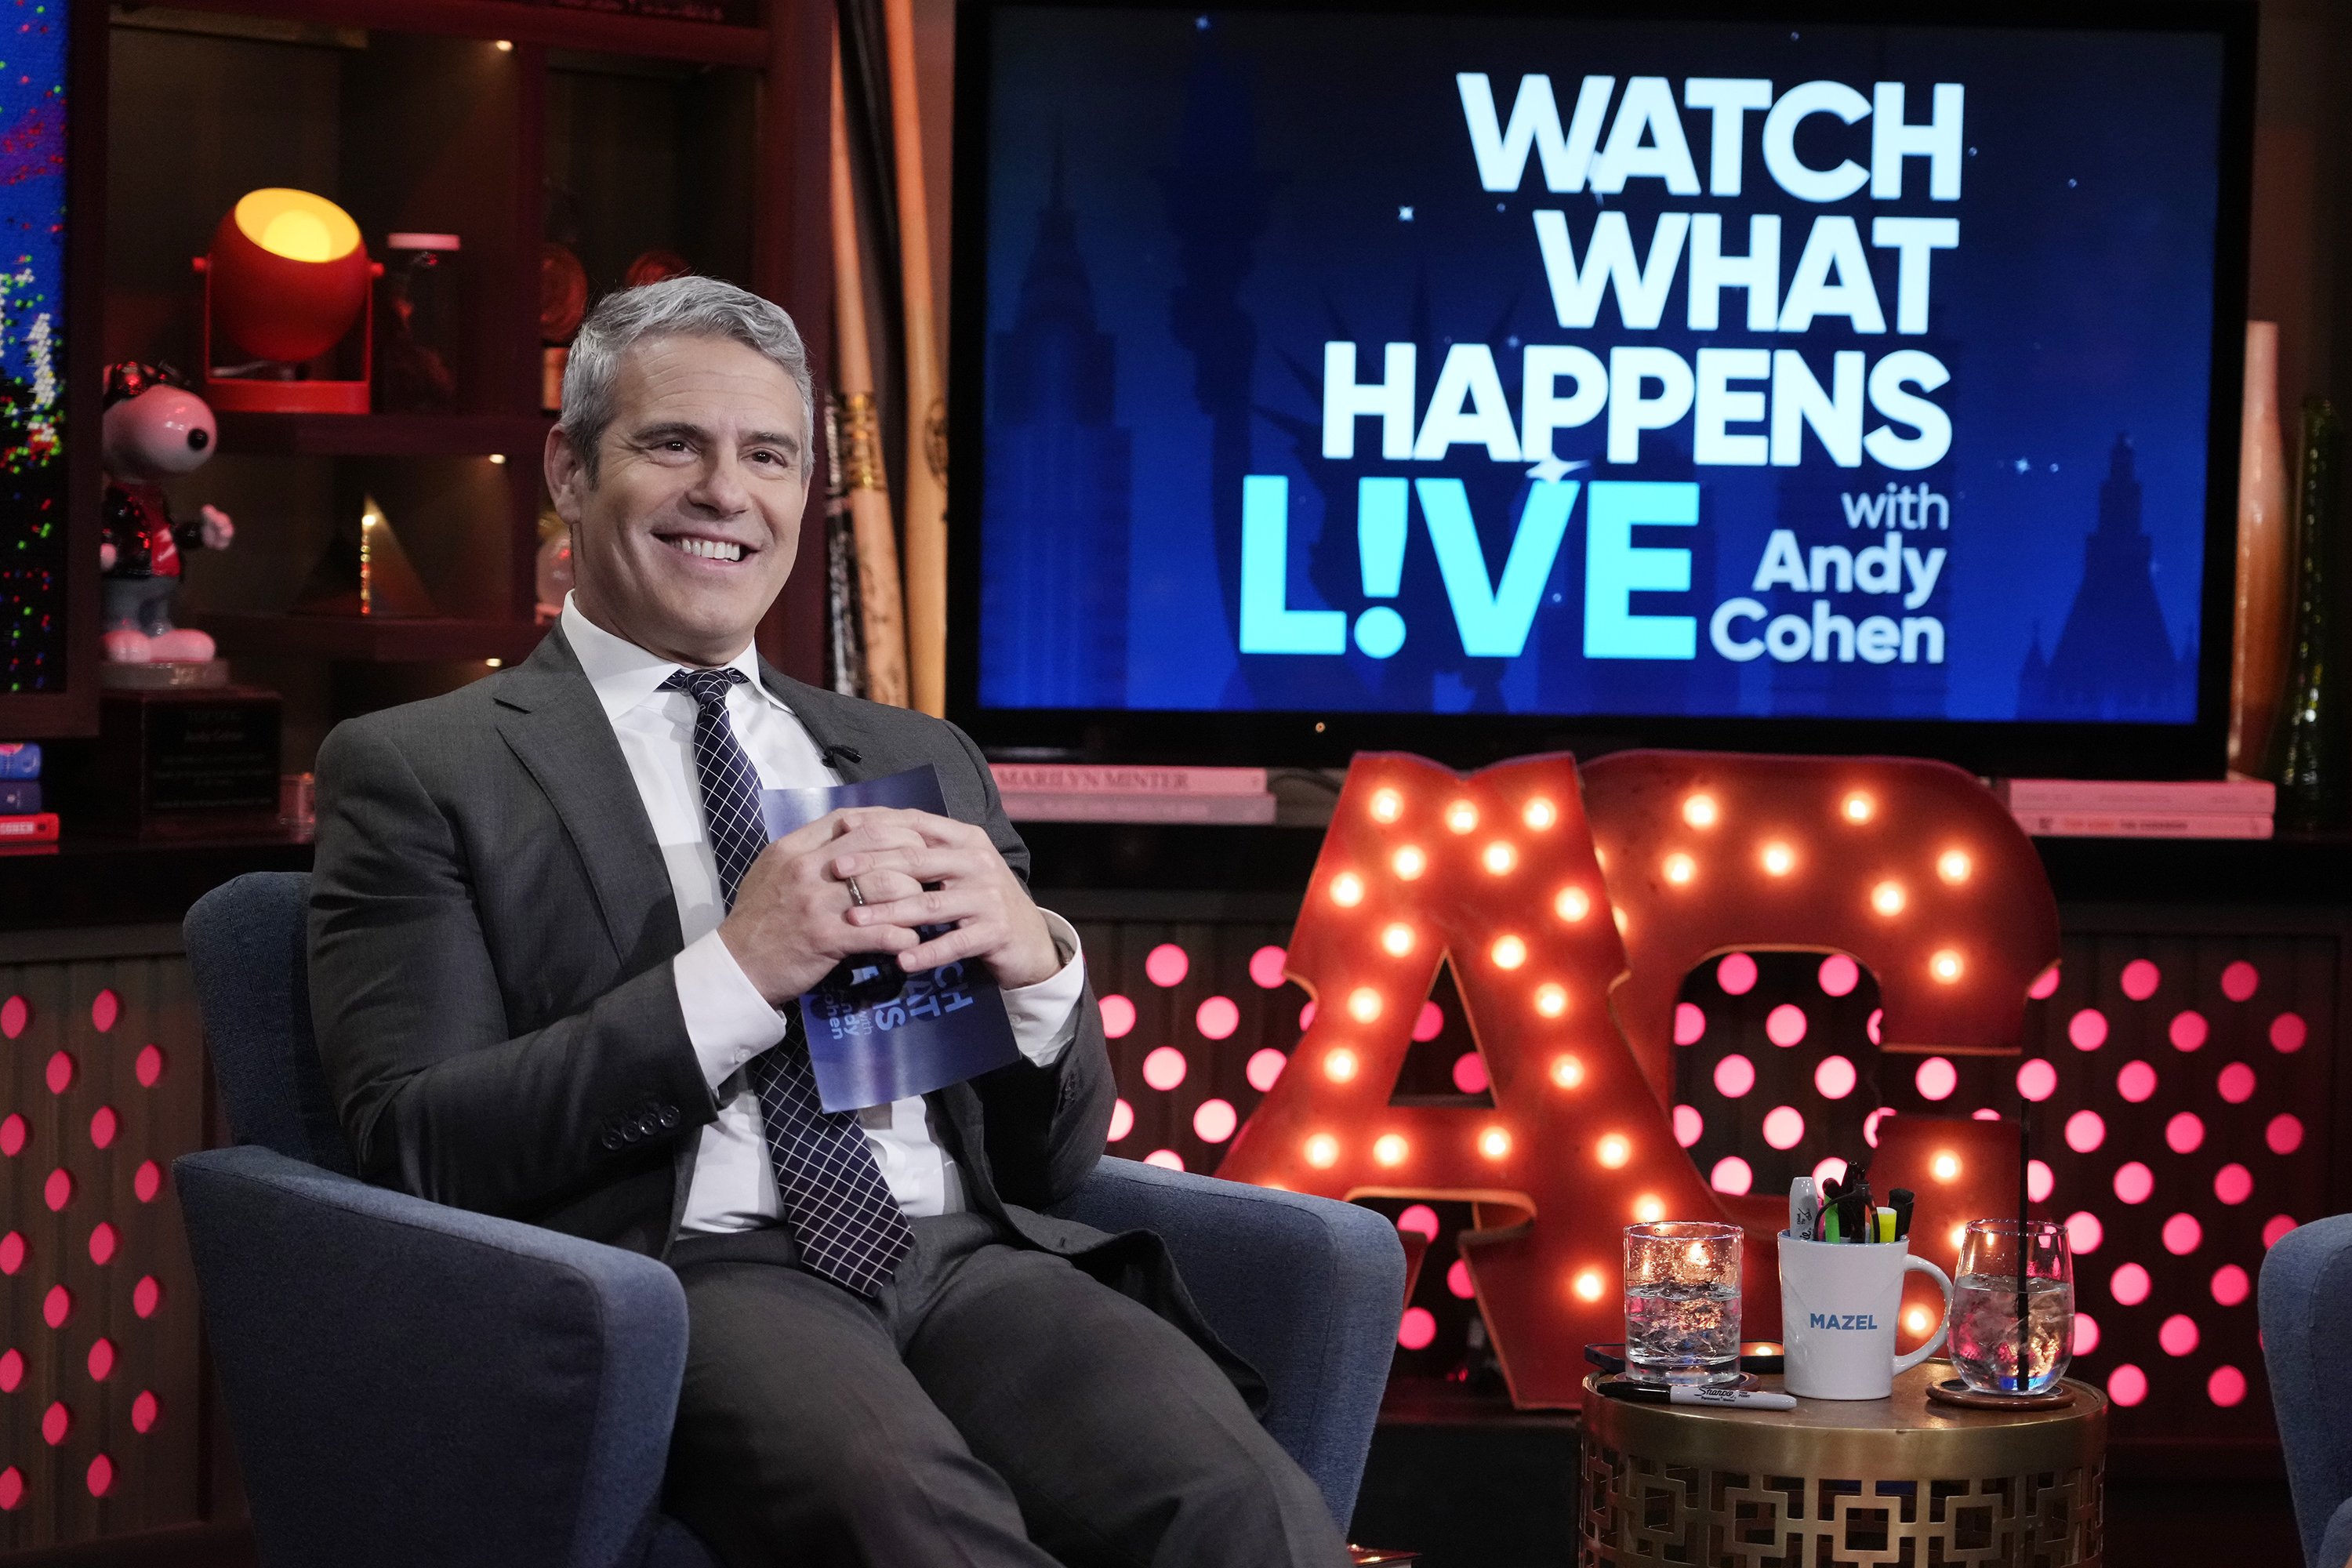 Andy Cohen on the set of his show "Watch What Happens Live With Andy Cohen" on April 12, 2022 | Source: Getty Images